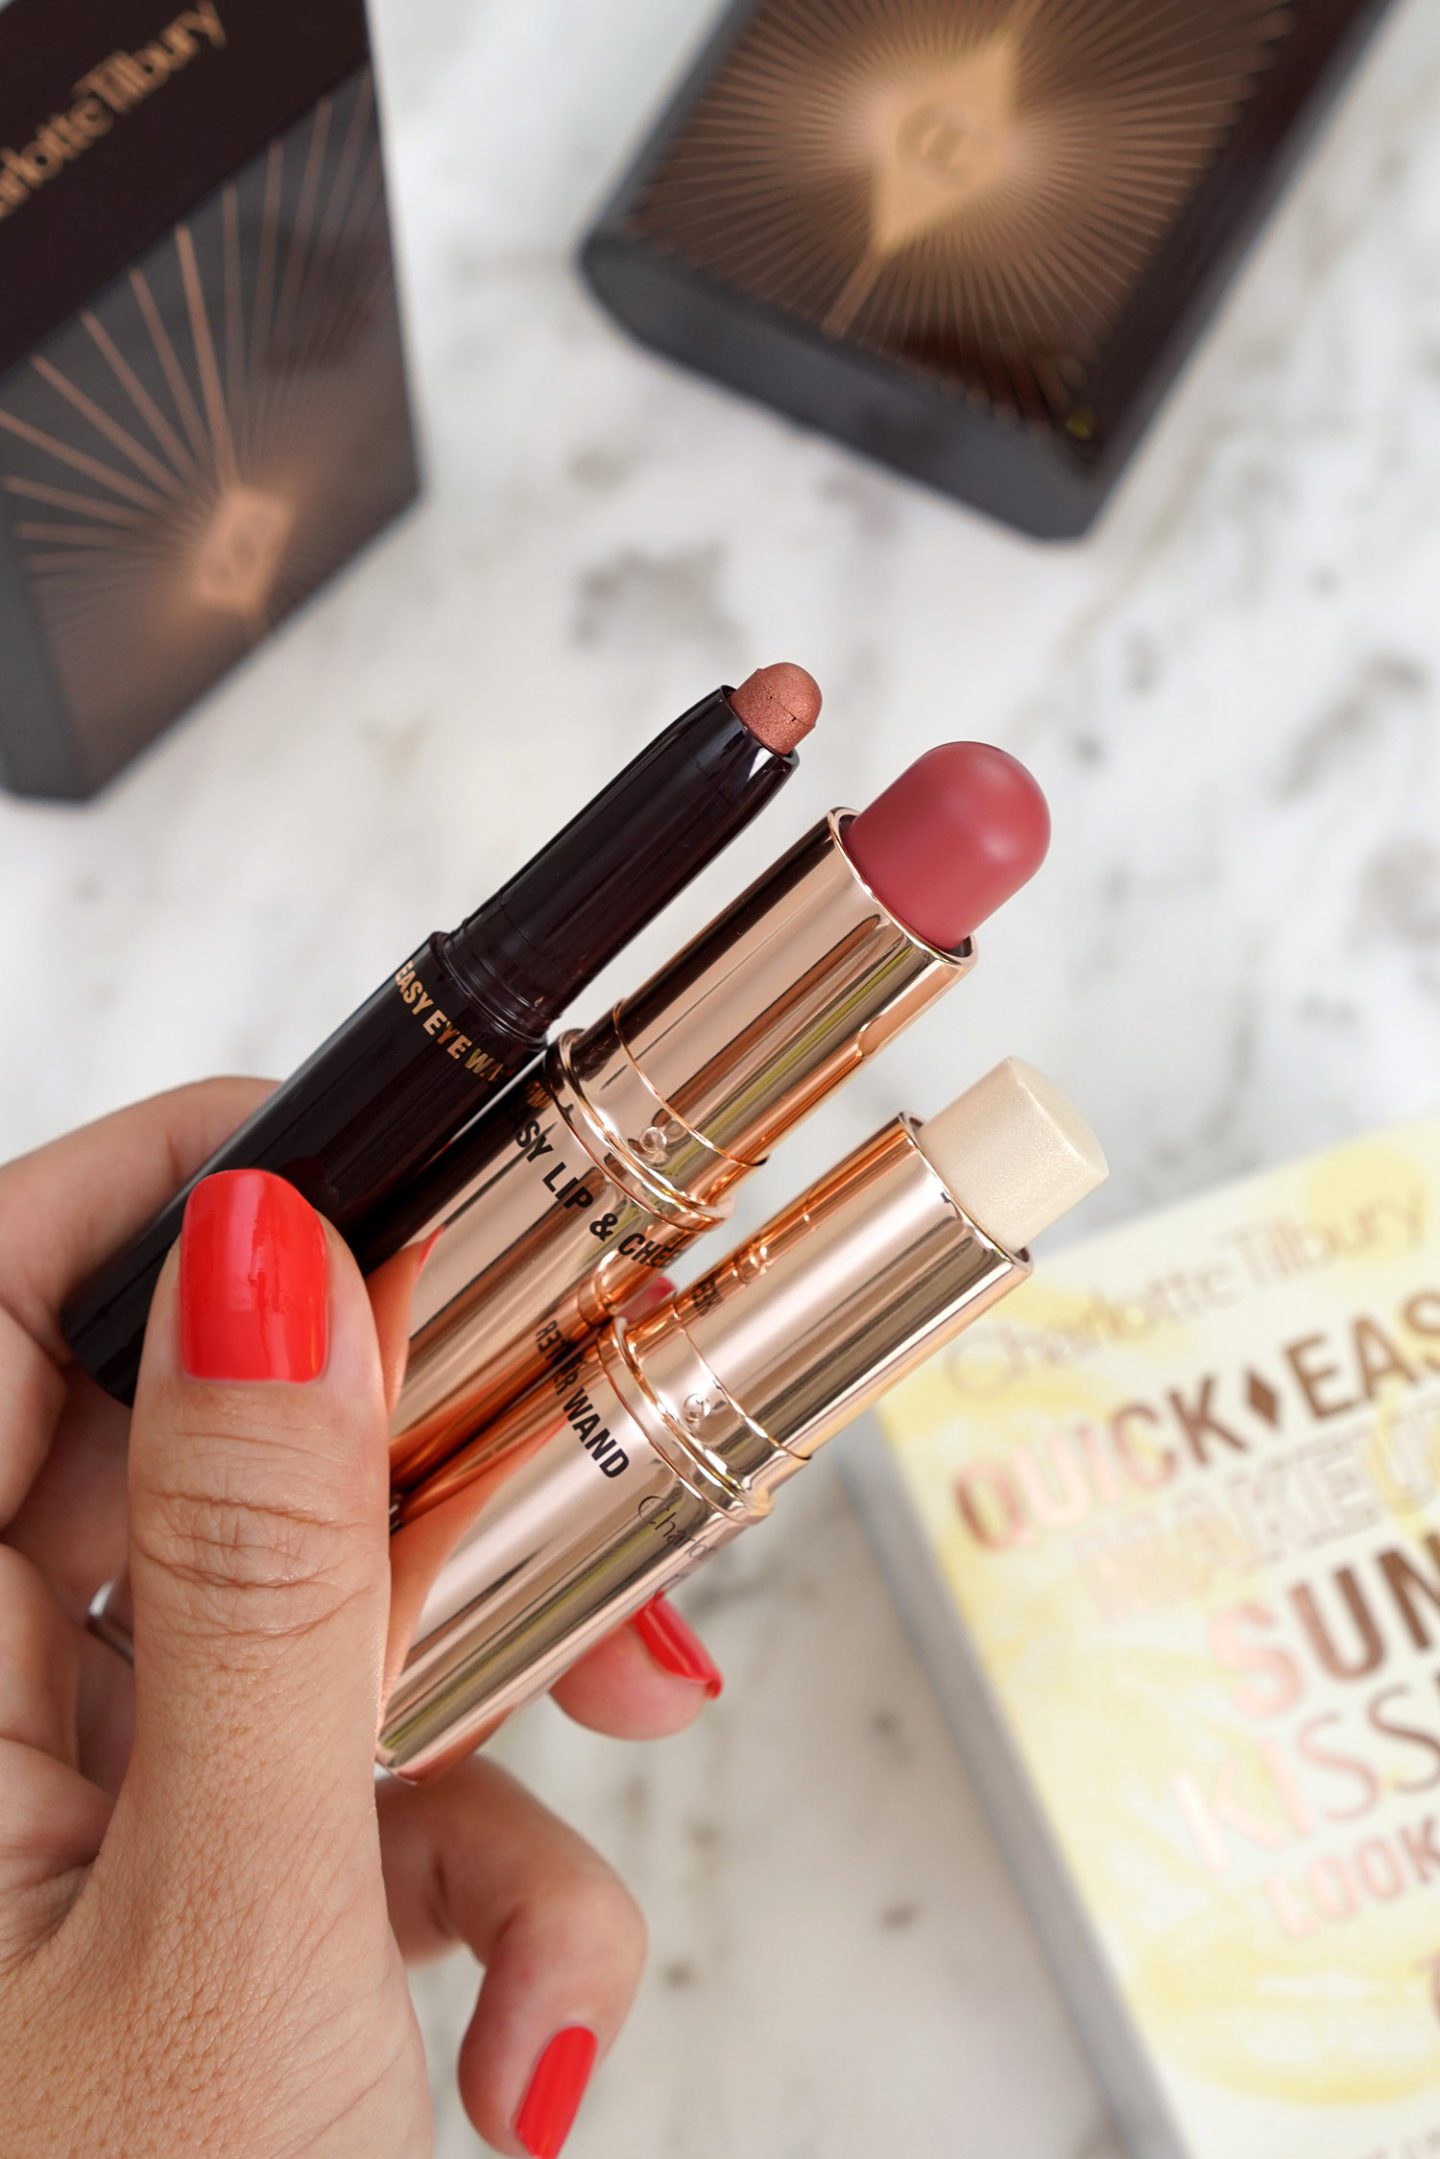 Charlotte Tilbury Quick and Easy Sun-Kissed